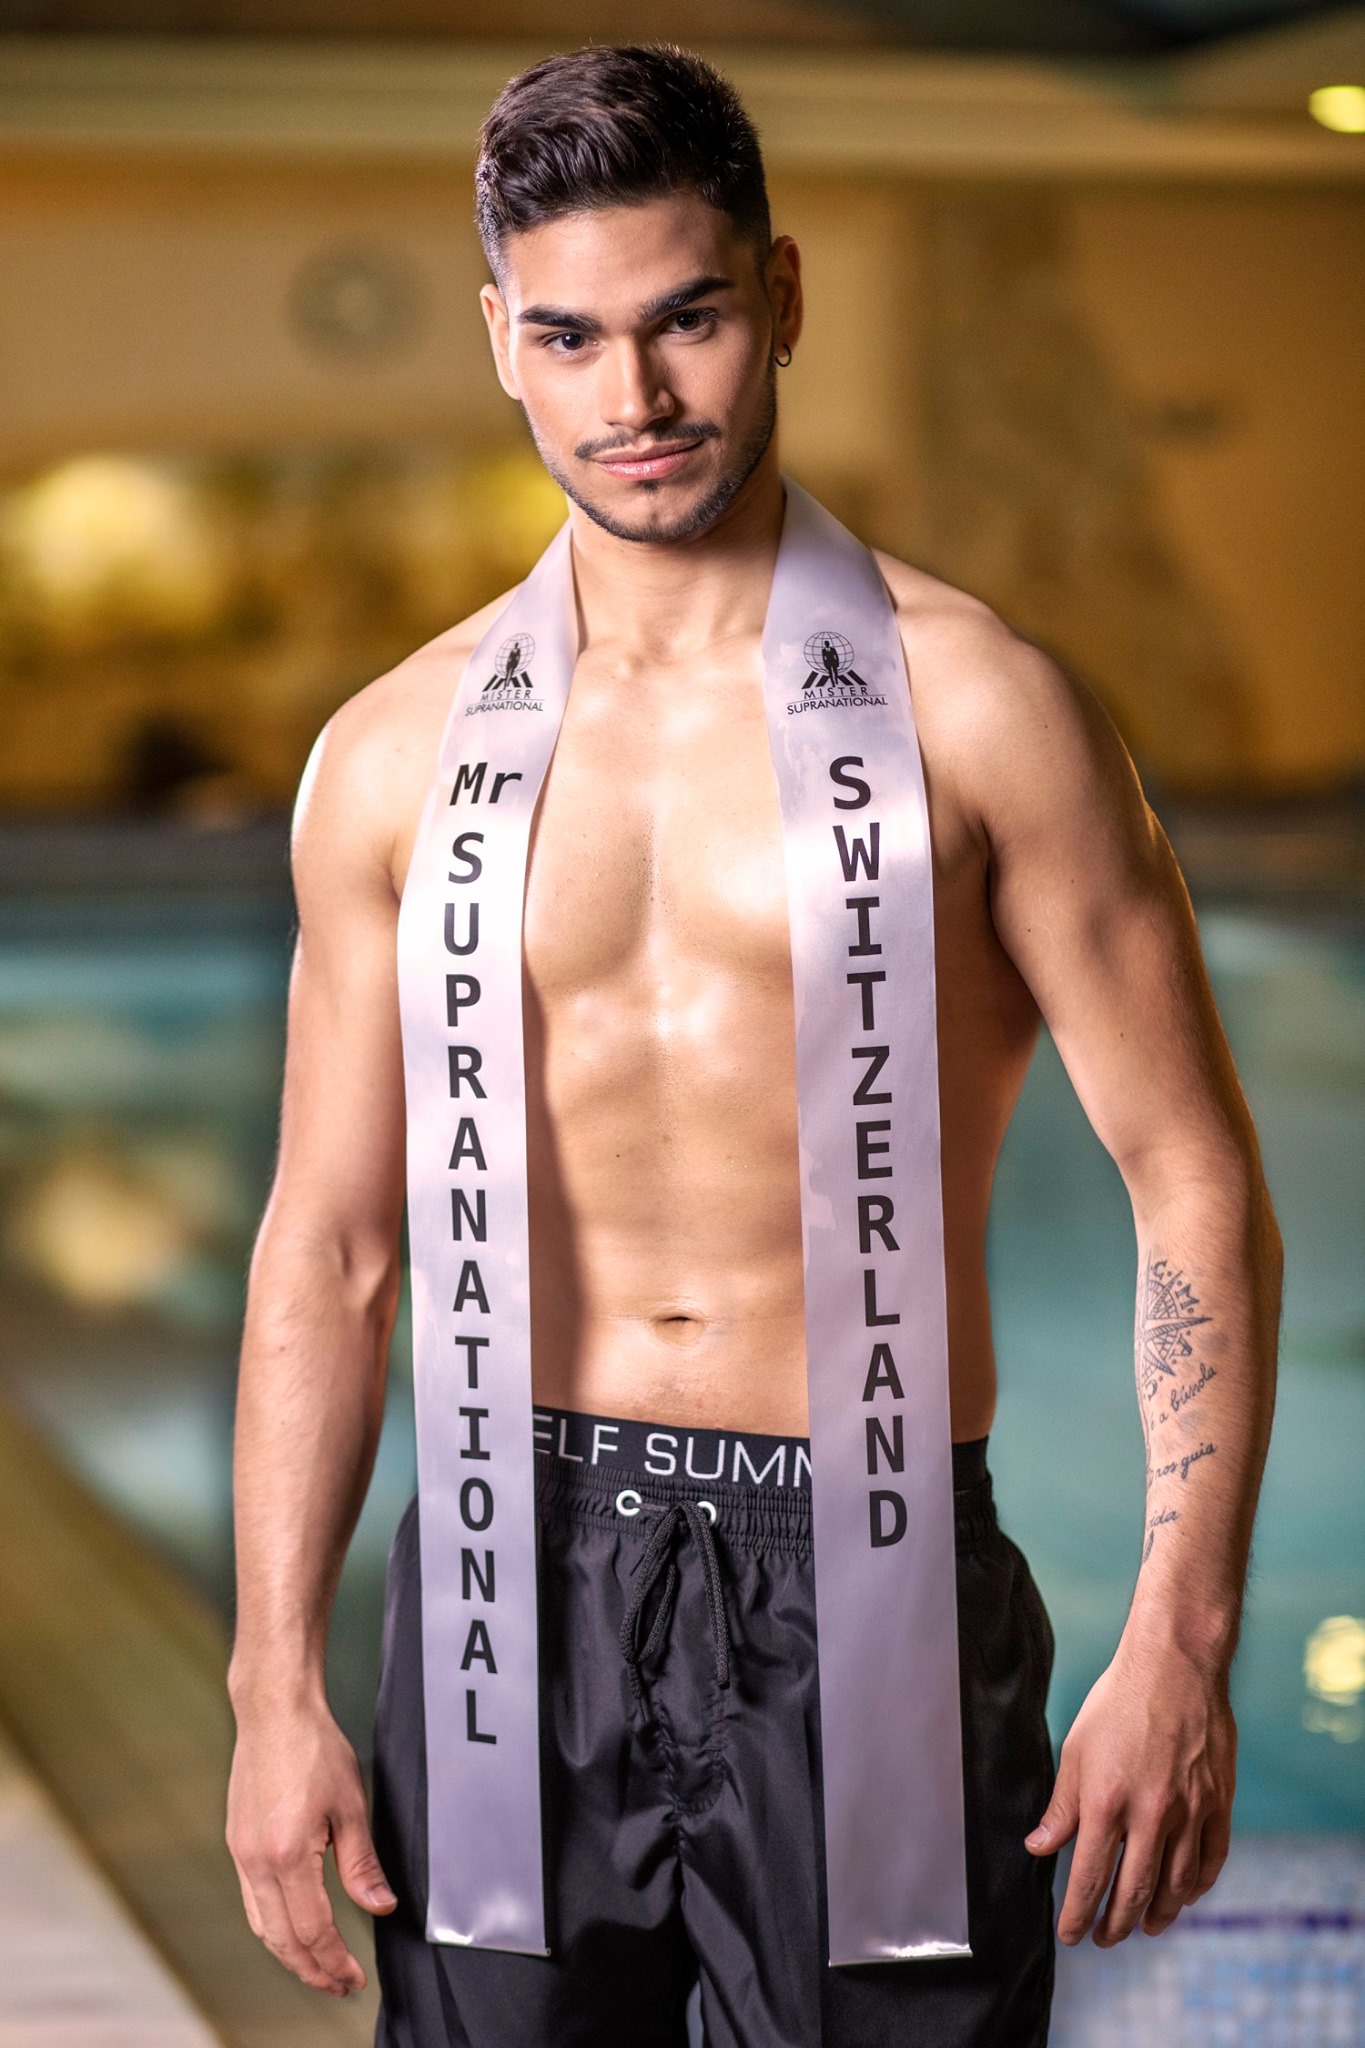 Mister Supranational 2019 Official Swimwear 0017